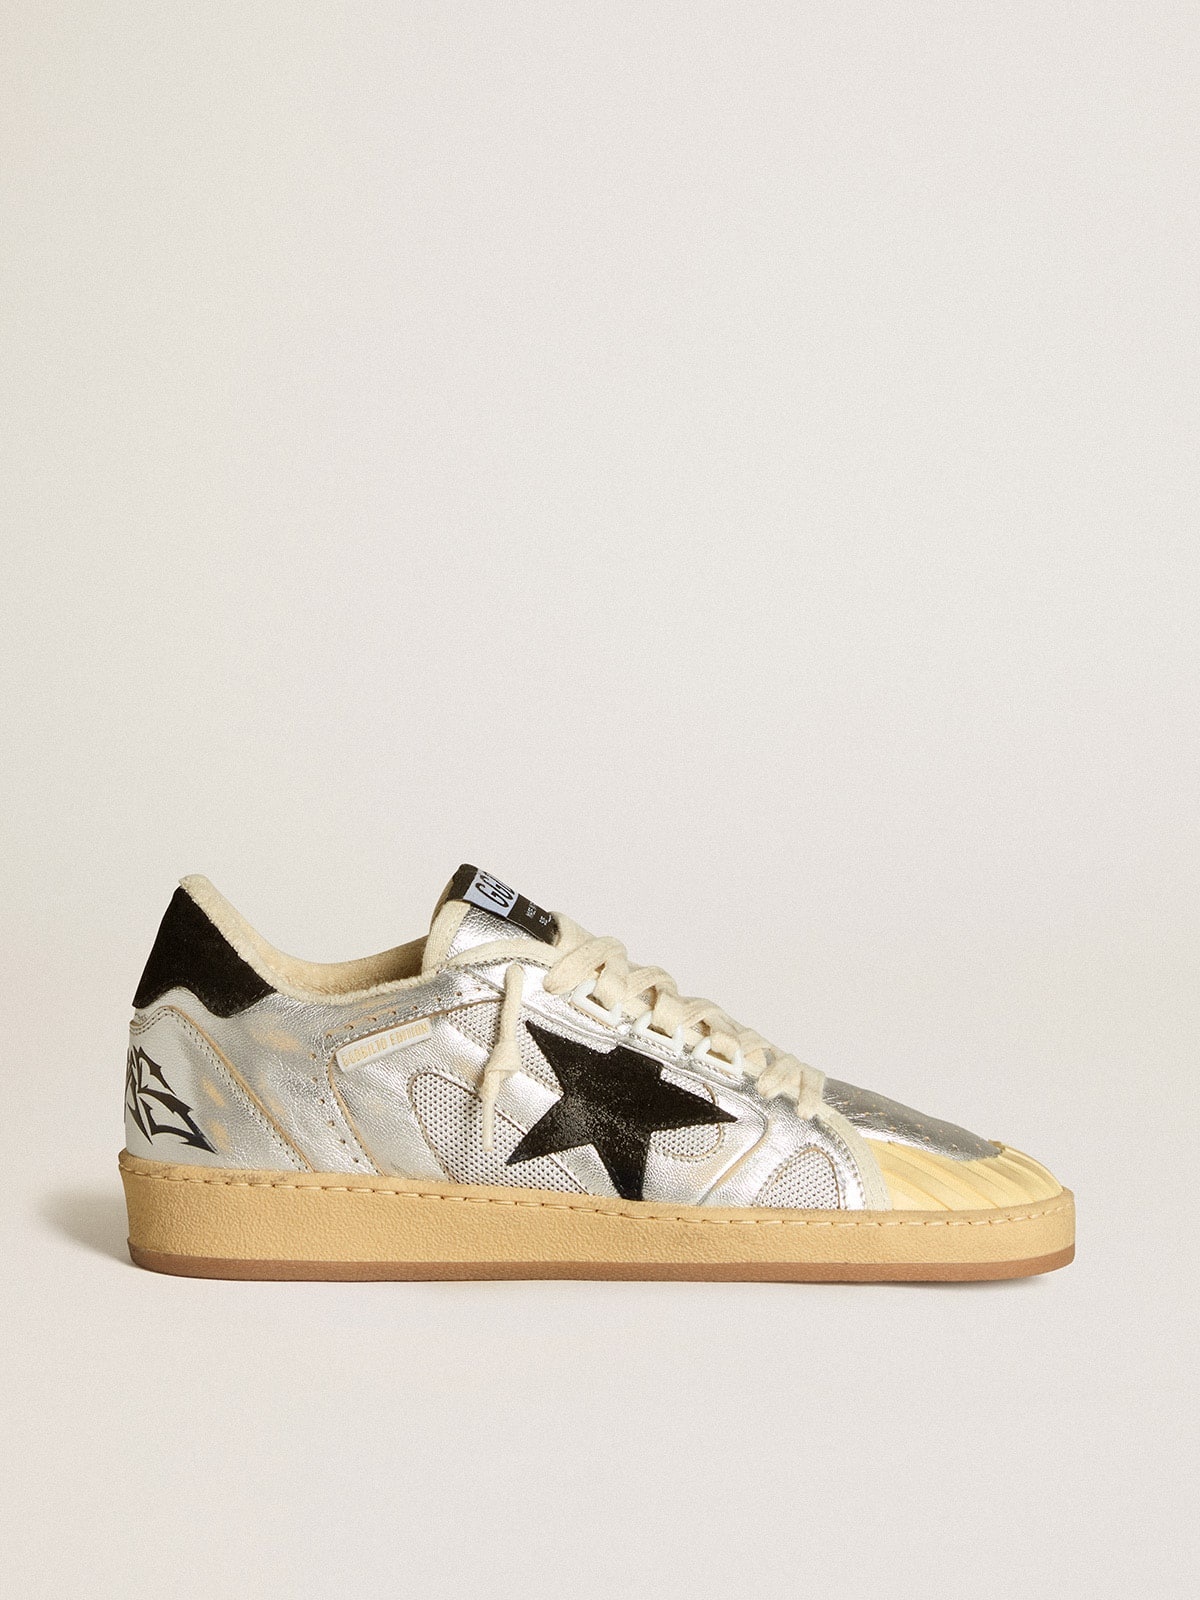 Ball Star LAB in silver leather with black suede star and heel tab - 1